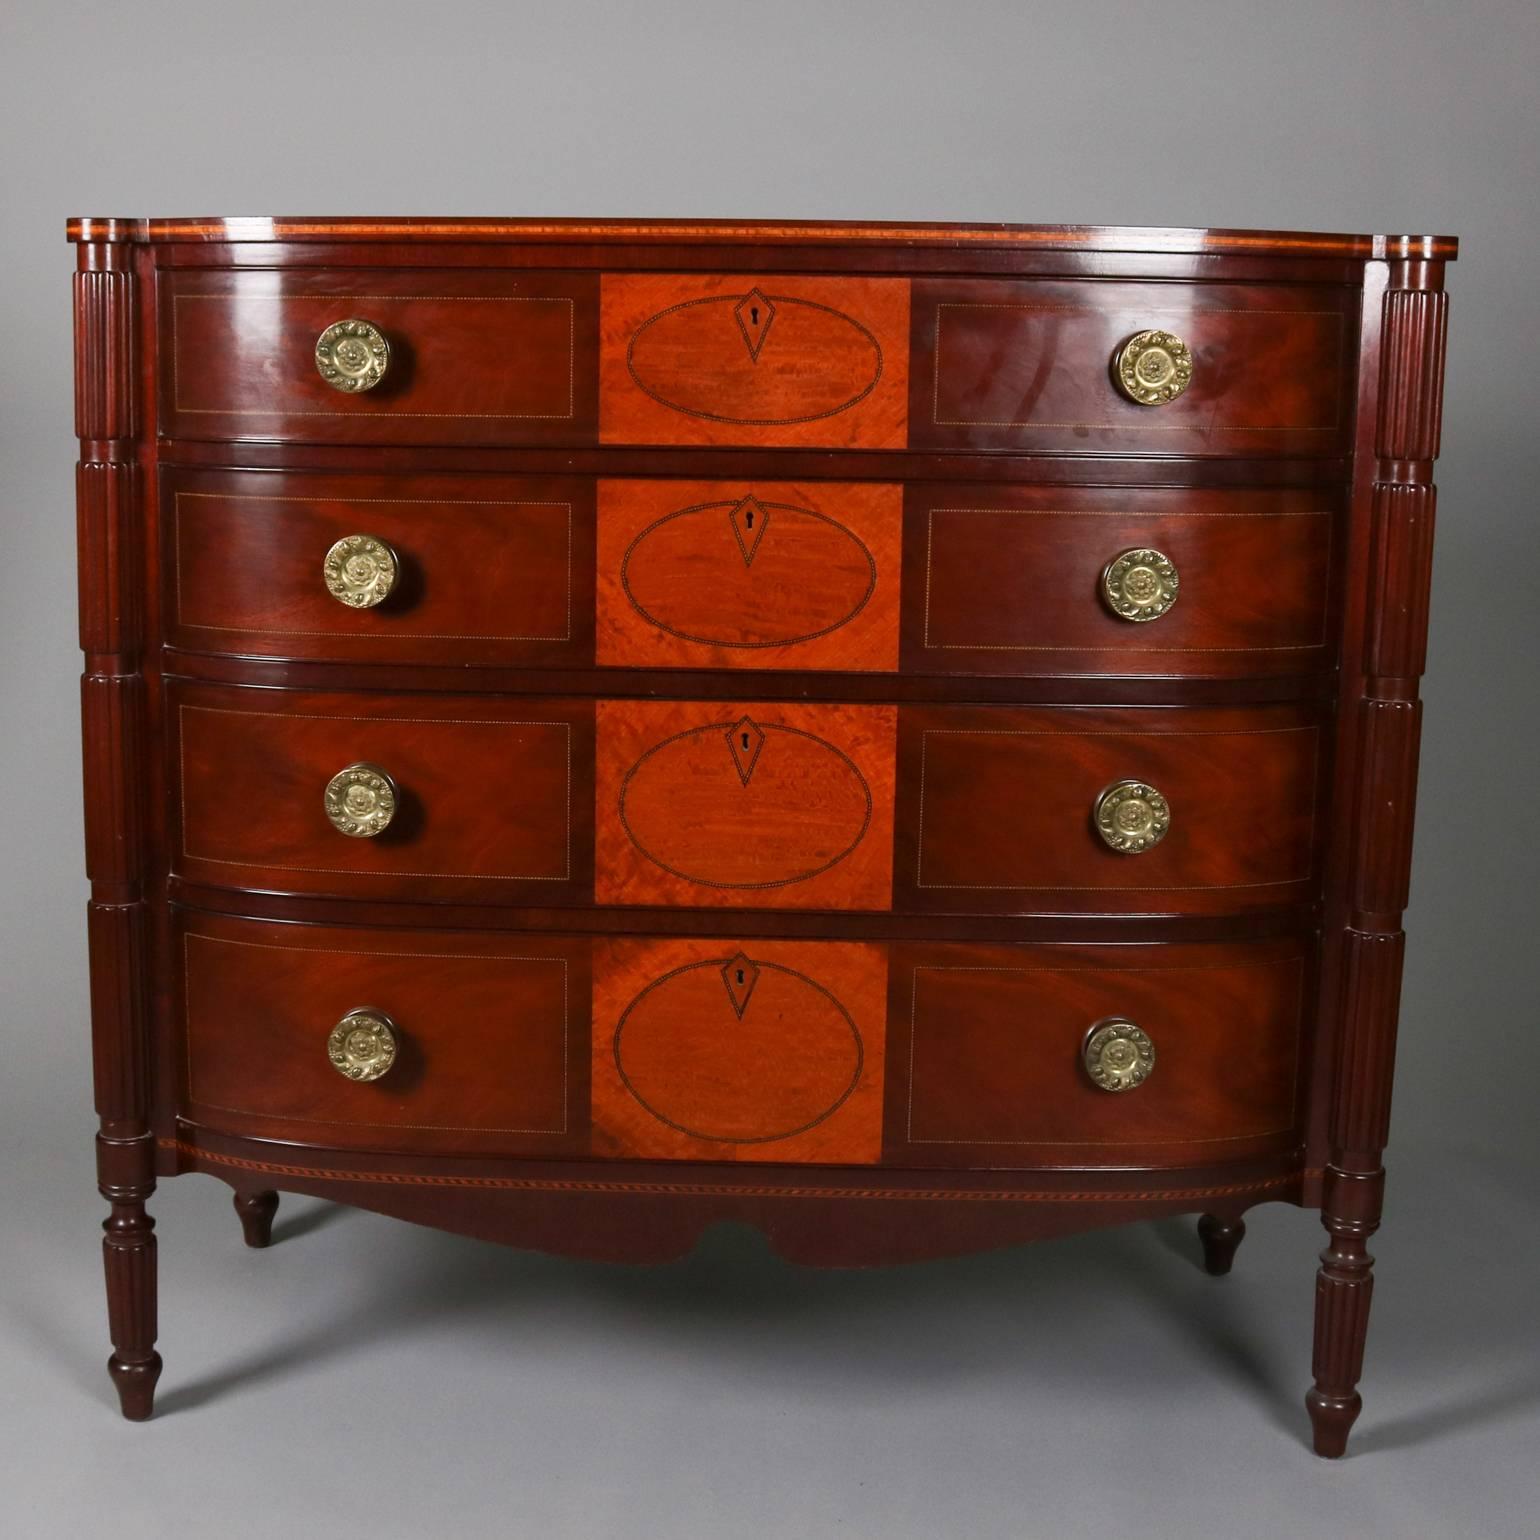 Antique English Sheraton flame mahogany bow front four-drawer chest features burl inset reserves banded in alternating satinwood and ebonized inlay, satinwood banding throughout, case flanked by broken reeded columns, circa 1840

Measures: